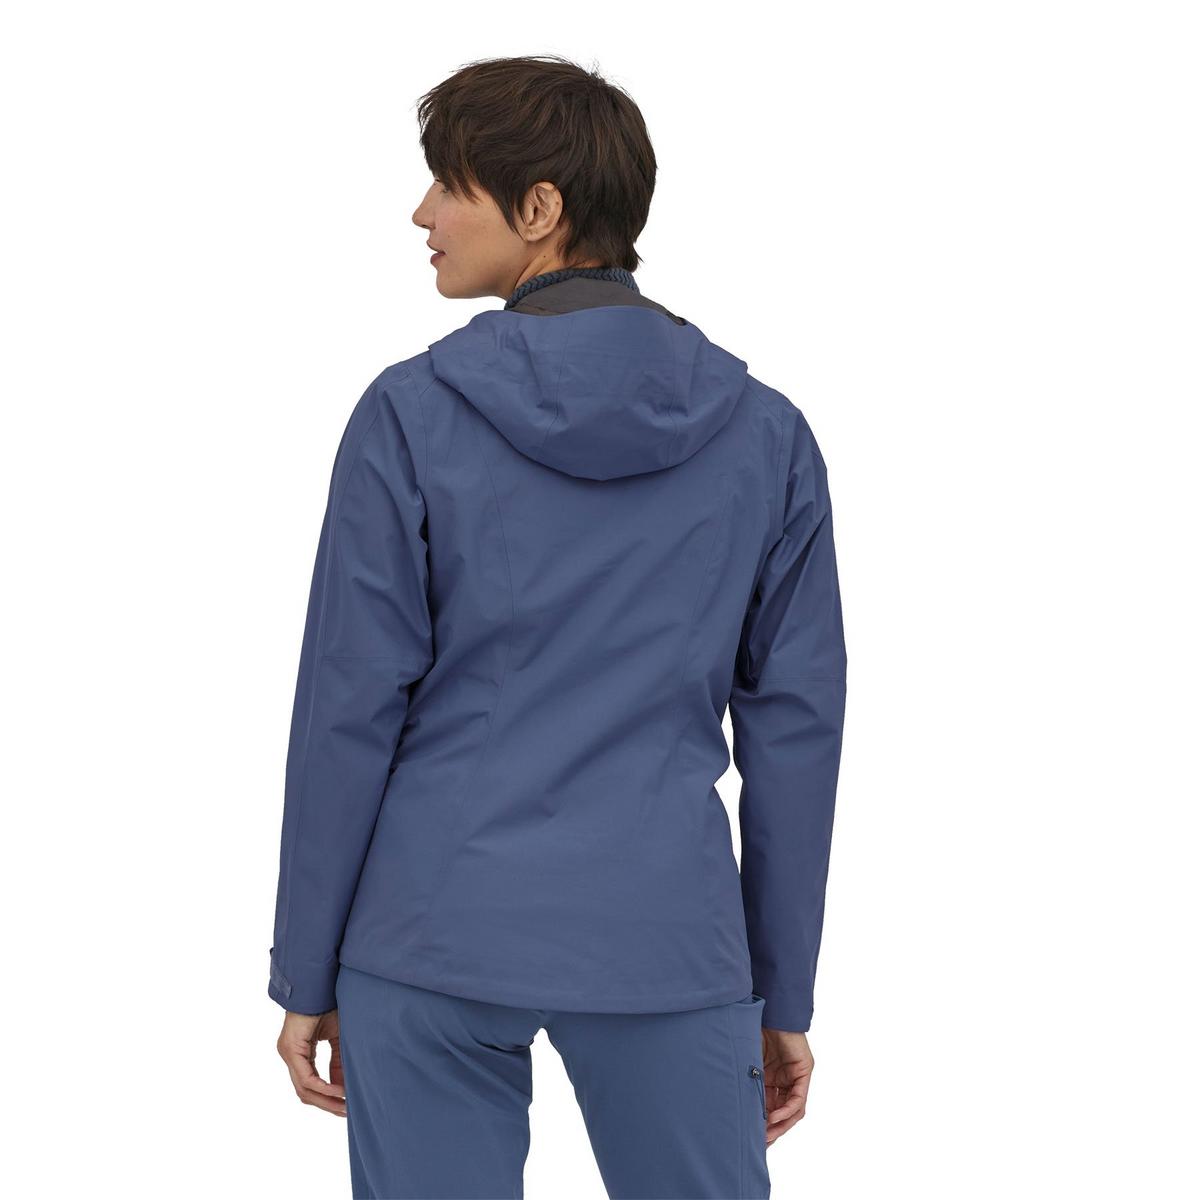 Patagonia Women's Calcite Jacket - Current Blue